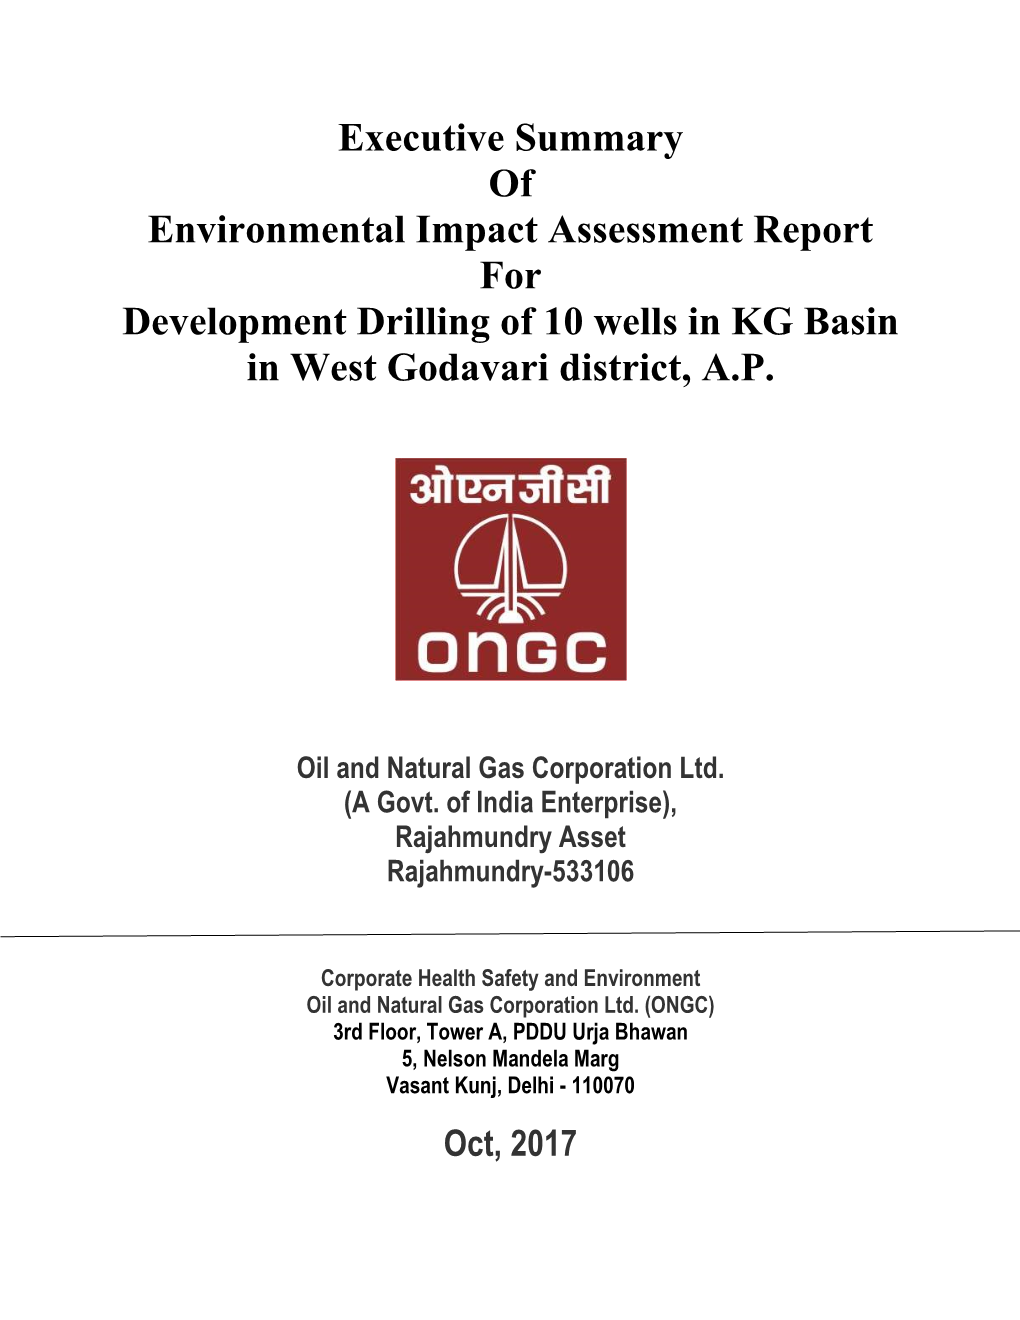 Executive Summary of EIA Report for Development Drilling of 10 Wells in KG Basin in West Godavari District, AP